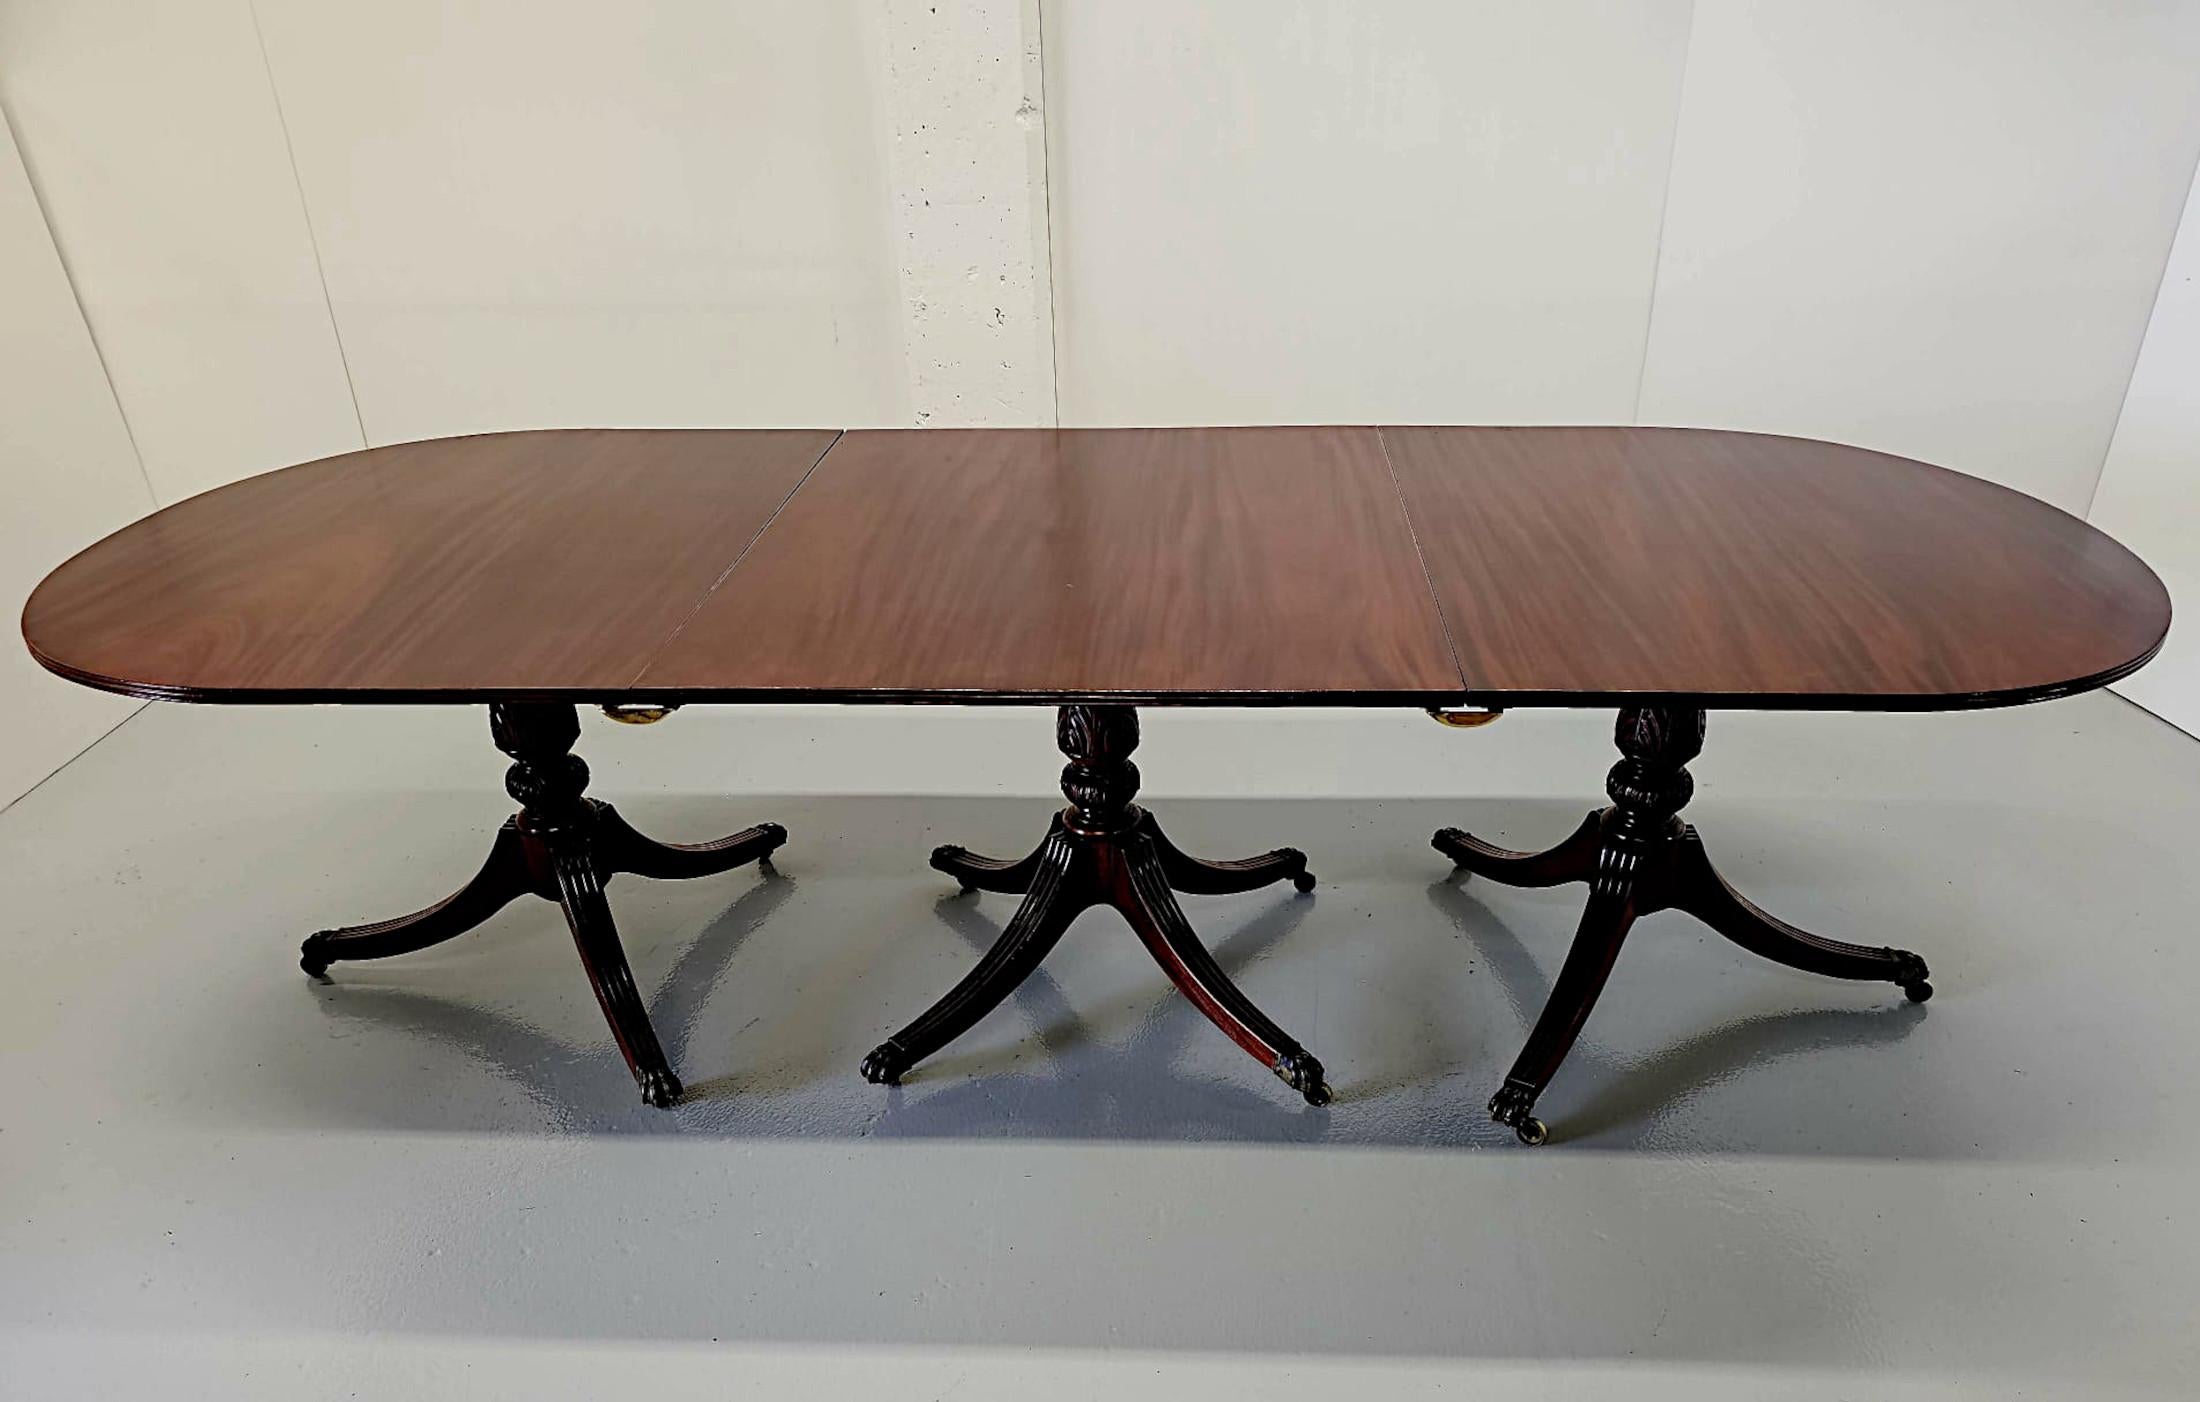 A very fine early 20th Century Regency style D-end dining table, of impressive proportions, fully restored and fabulously carved with beautifully rich patination and grain.  This very fine piece features three interchangeable extension leaves which